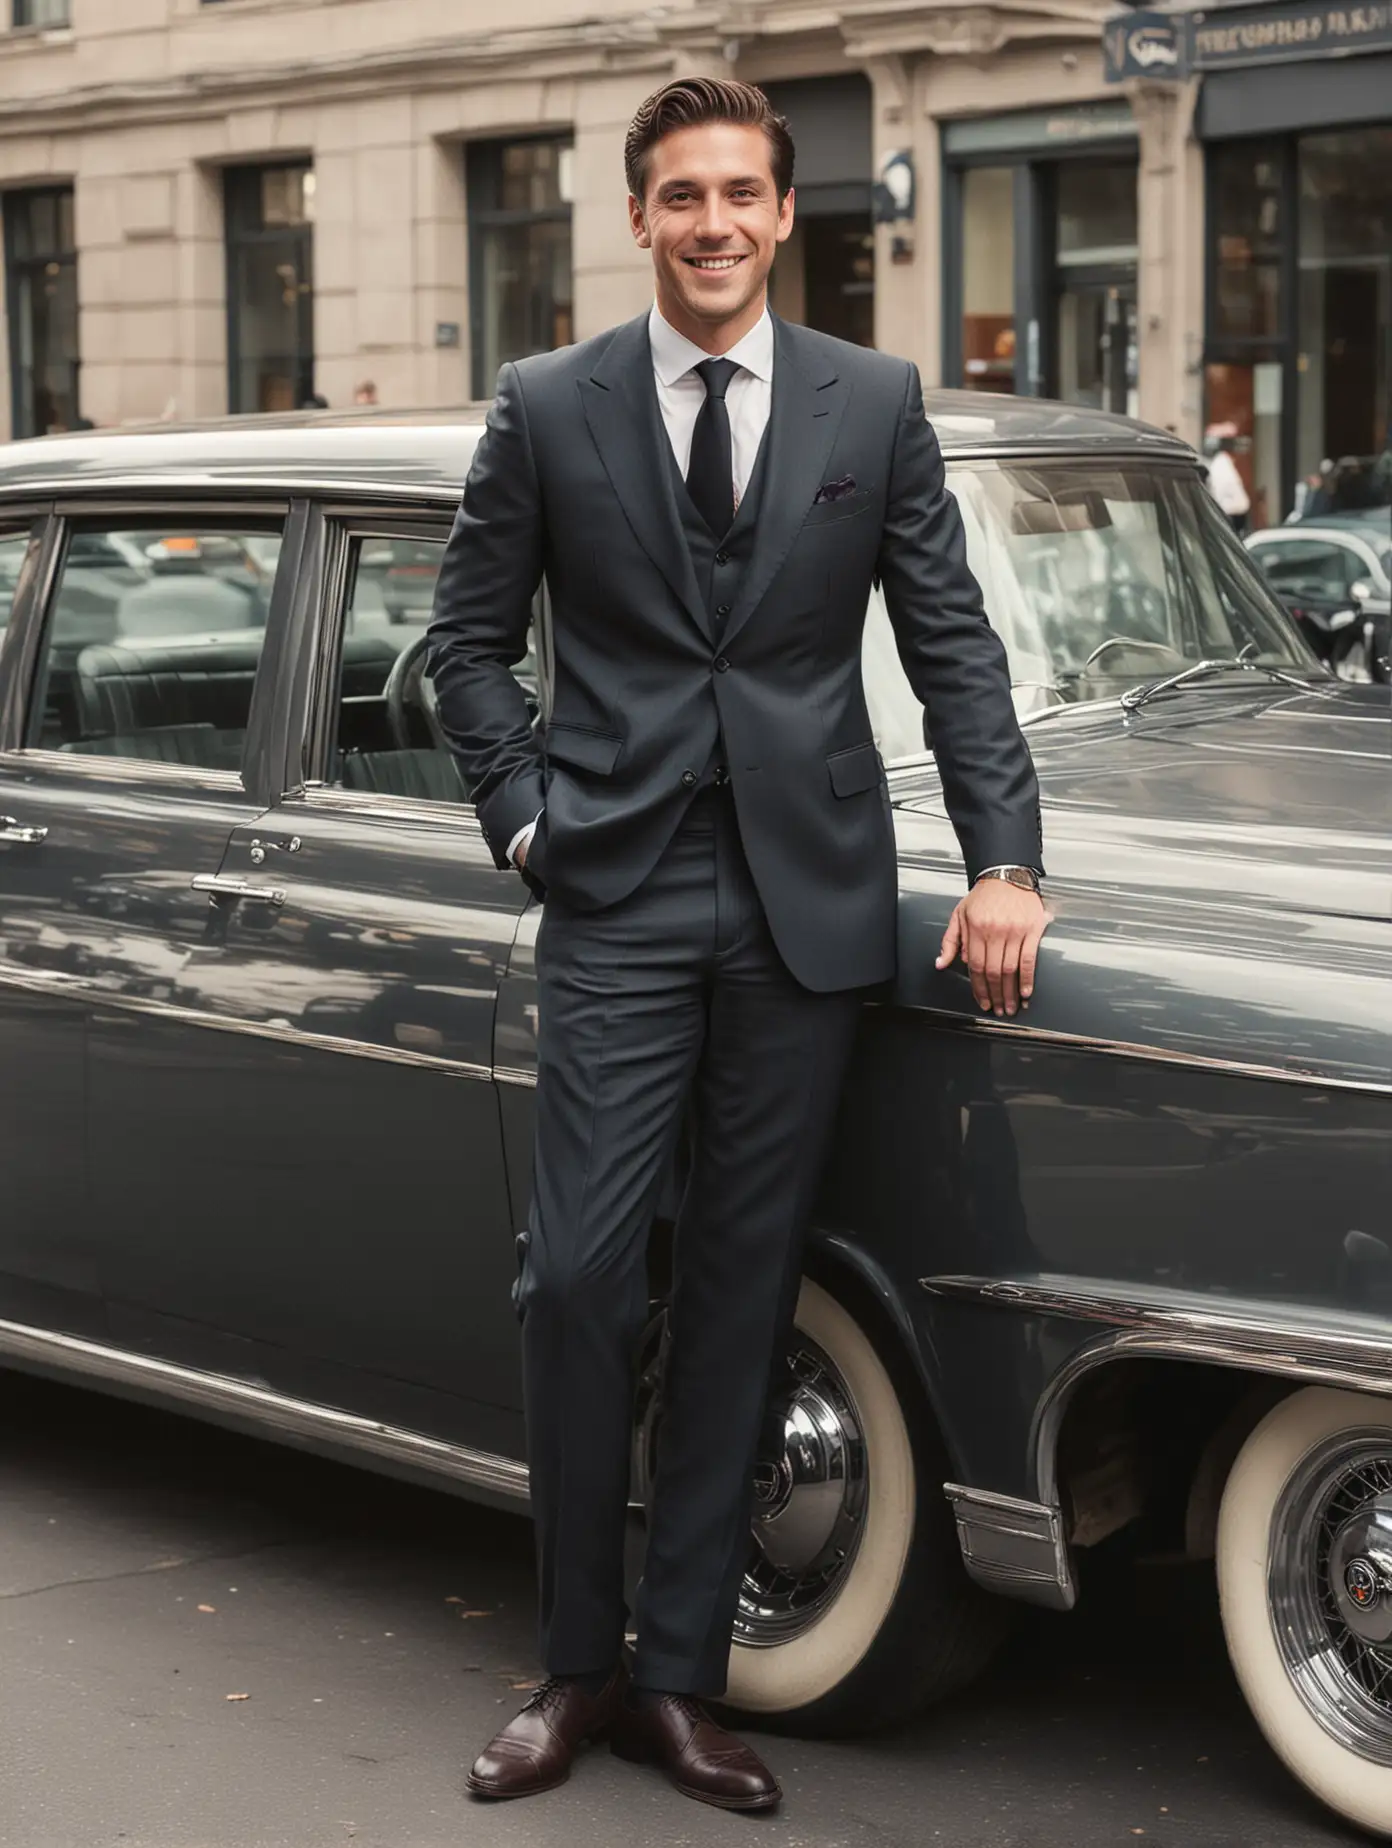 Elegant Gentleman in Suit Relaxing by Classic Sedan with Charismatic Smile